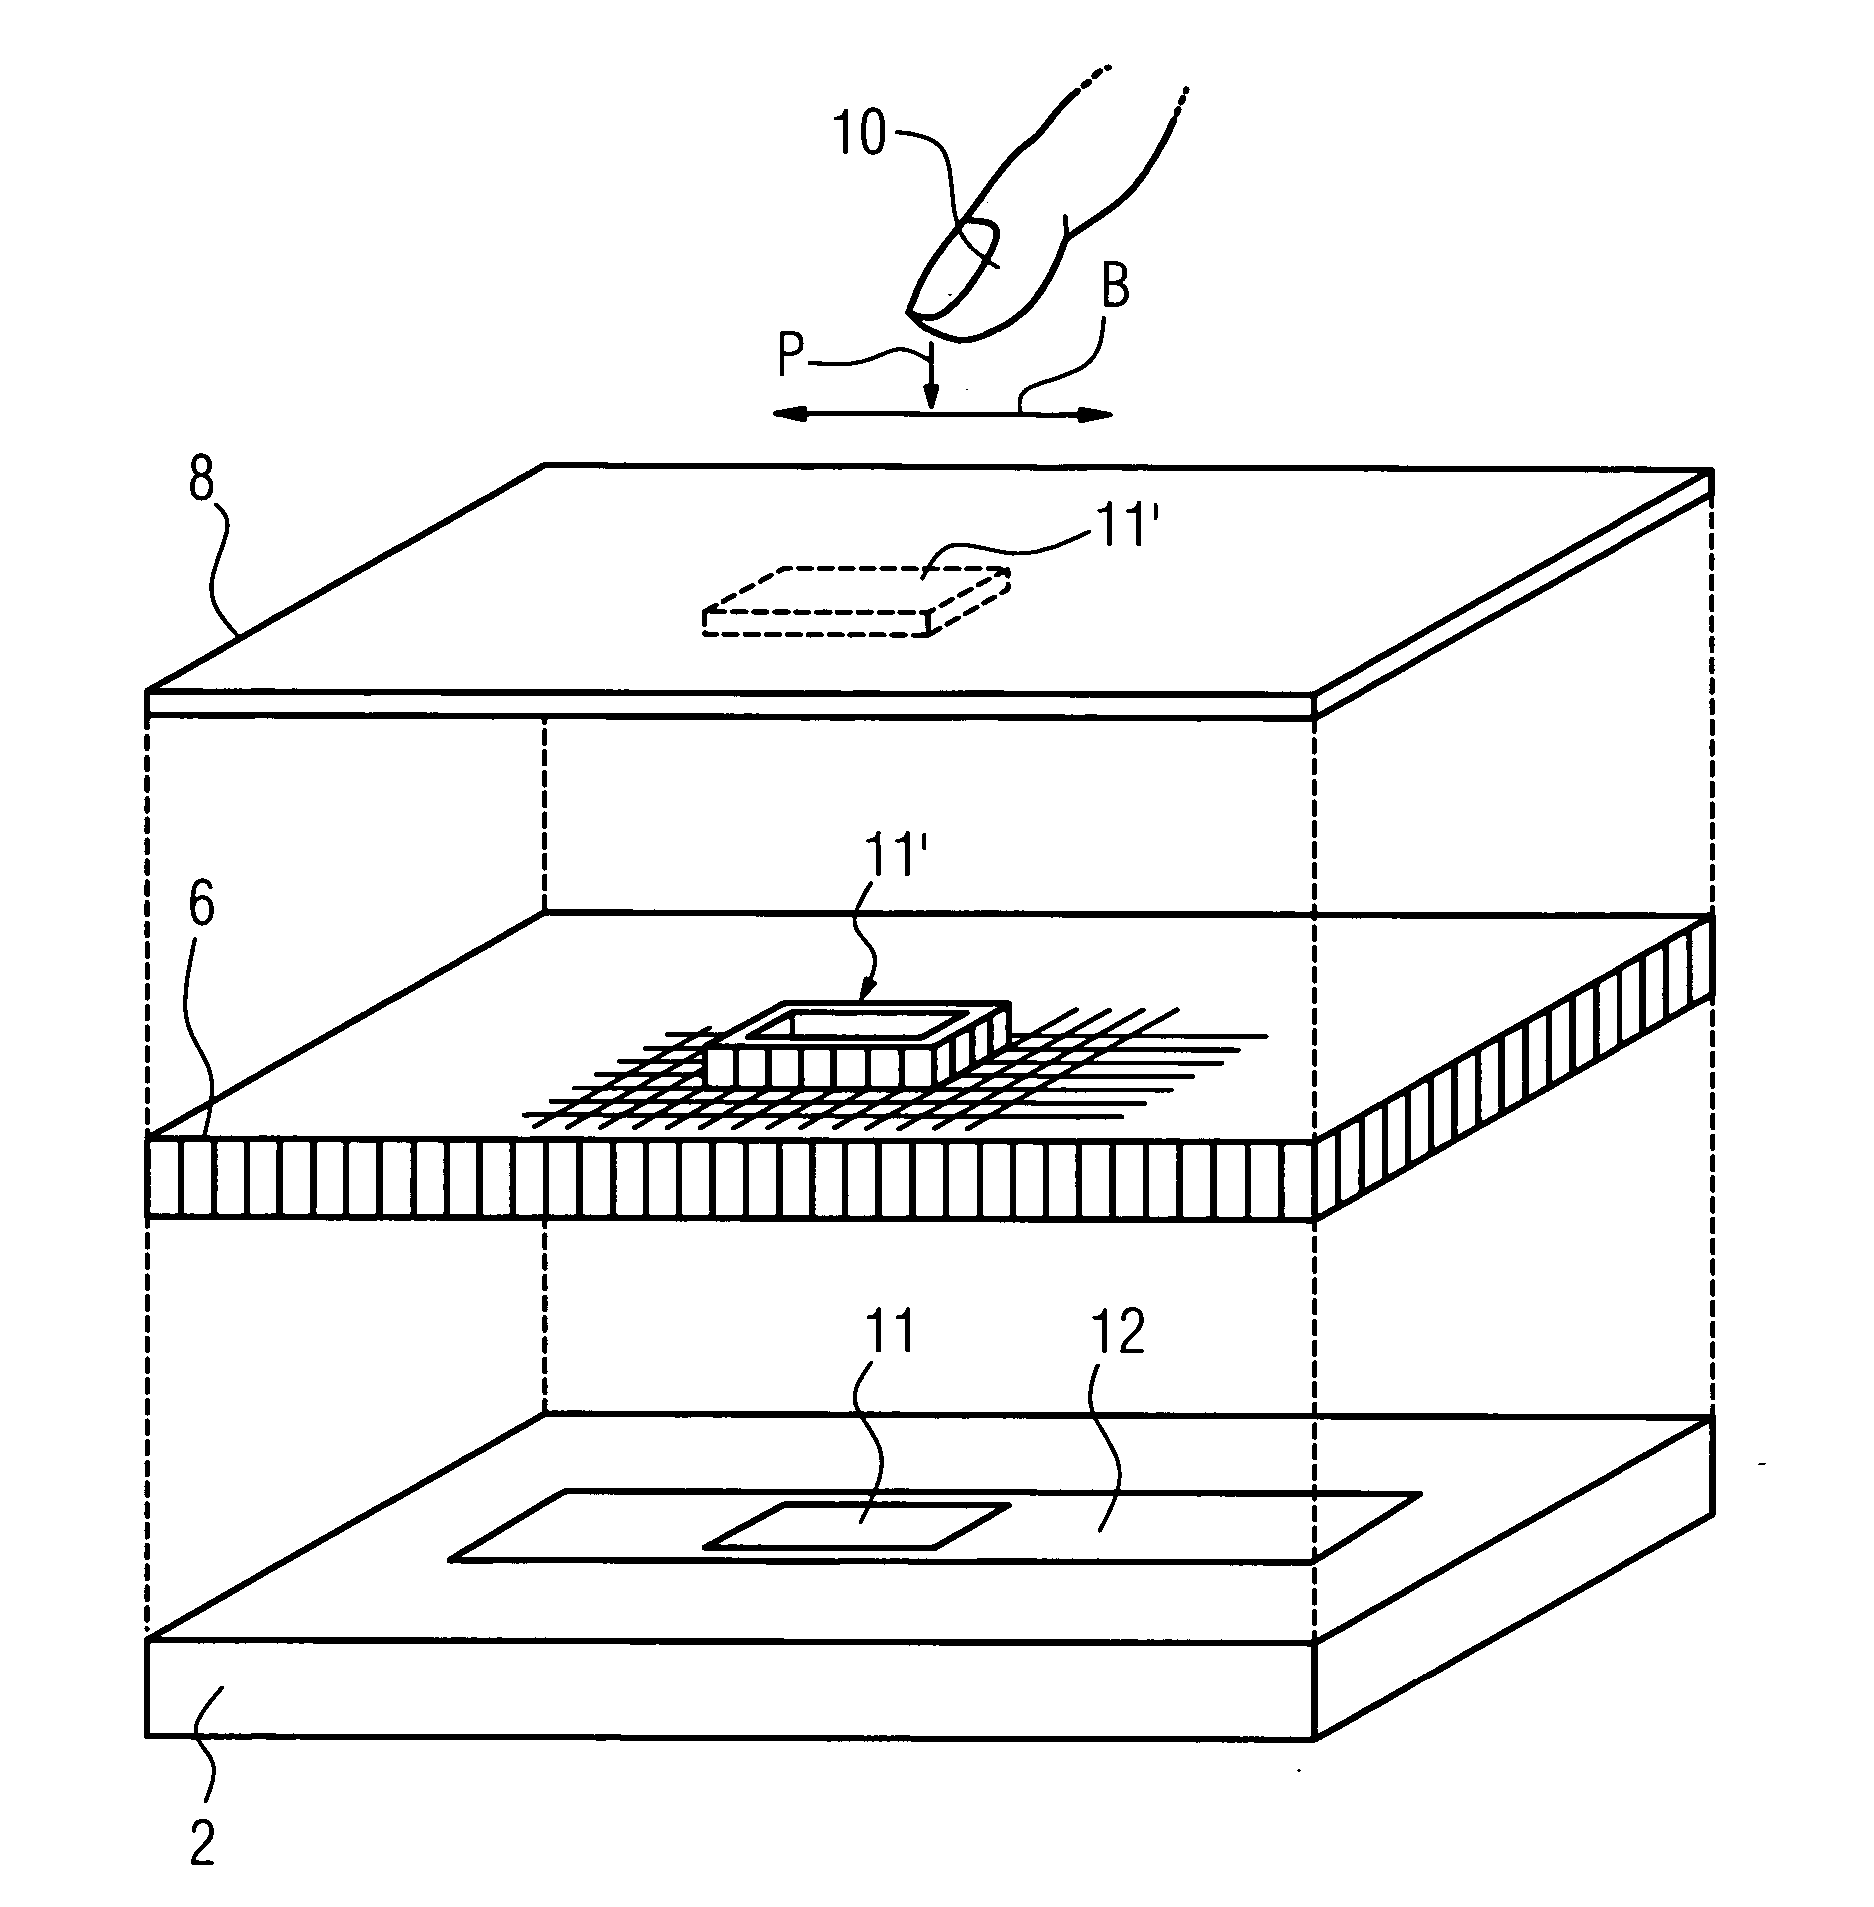 Screen having a touch-sensitive user interface for command input